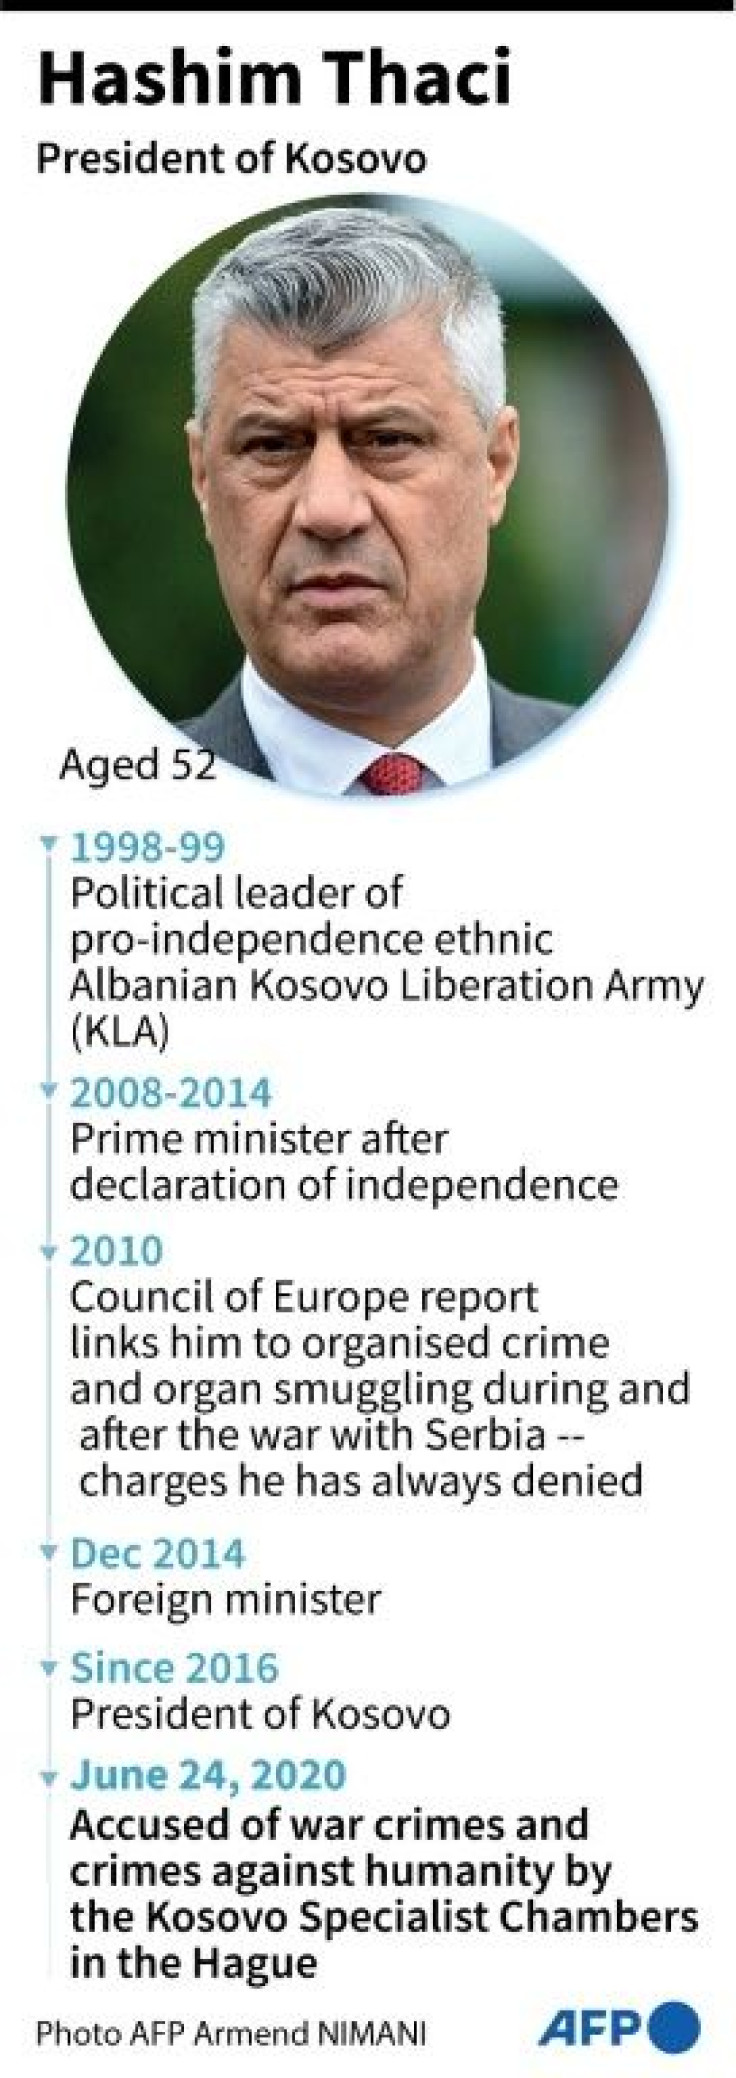 Biography of Kosovo President, Hashim Thaci, accused of war crimes and crimes against humanity by a special court in The Hague.